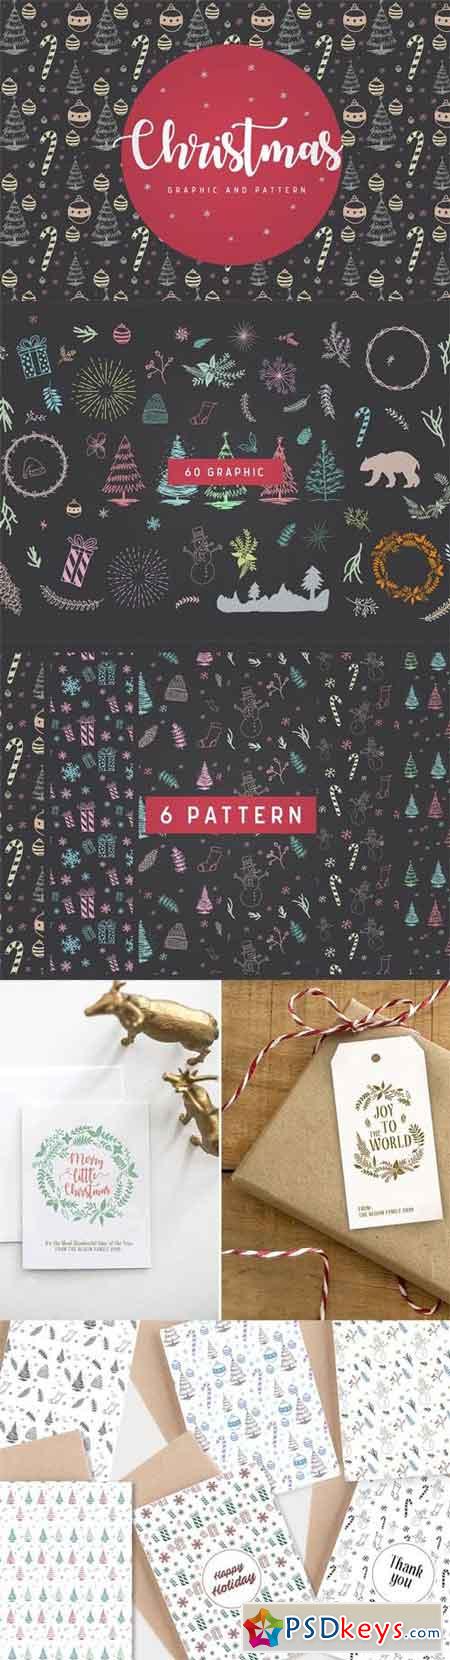 66 christmas Patterns & Graphic